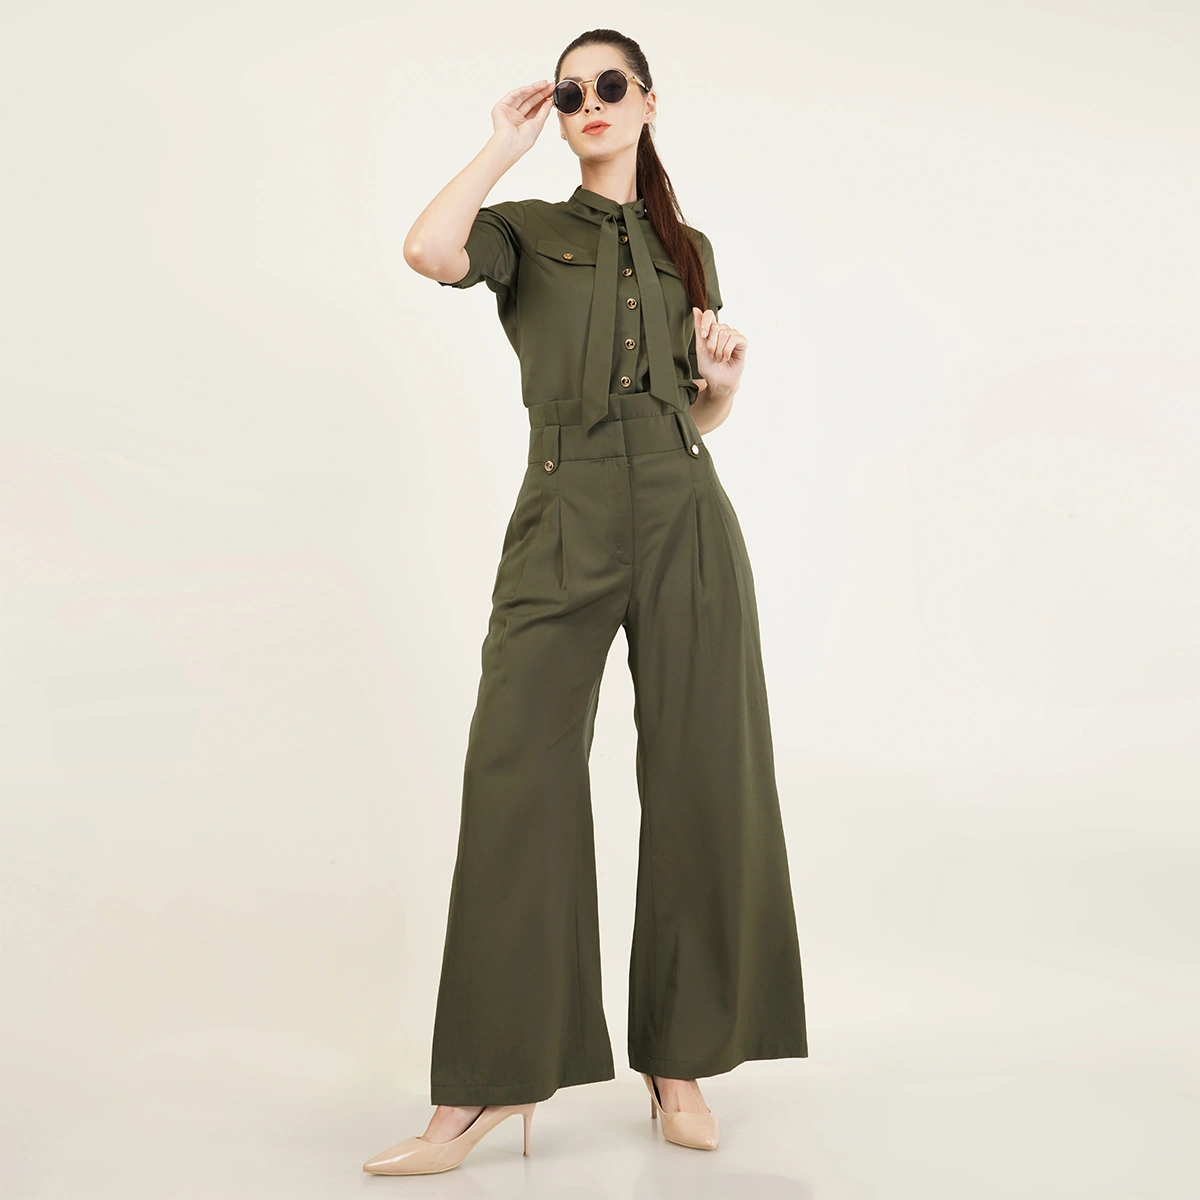 Knot Short Sleeve Pants Set | Pants for women, Sleeves, Clothes